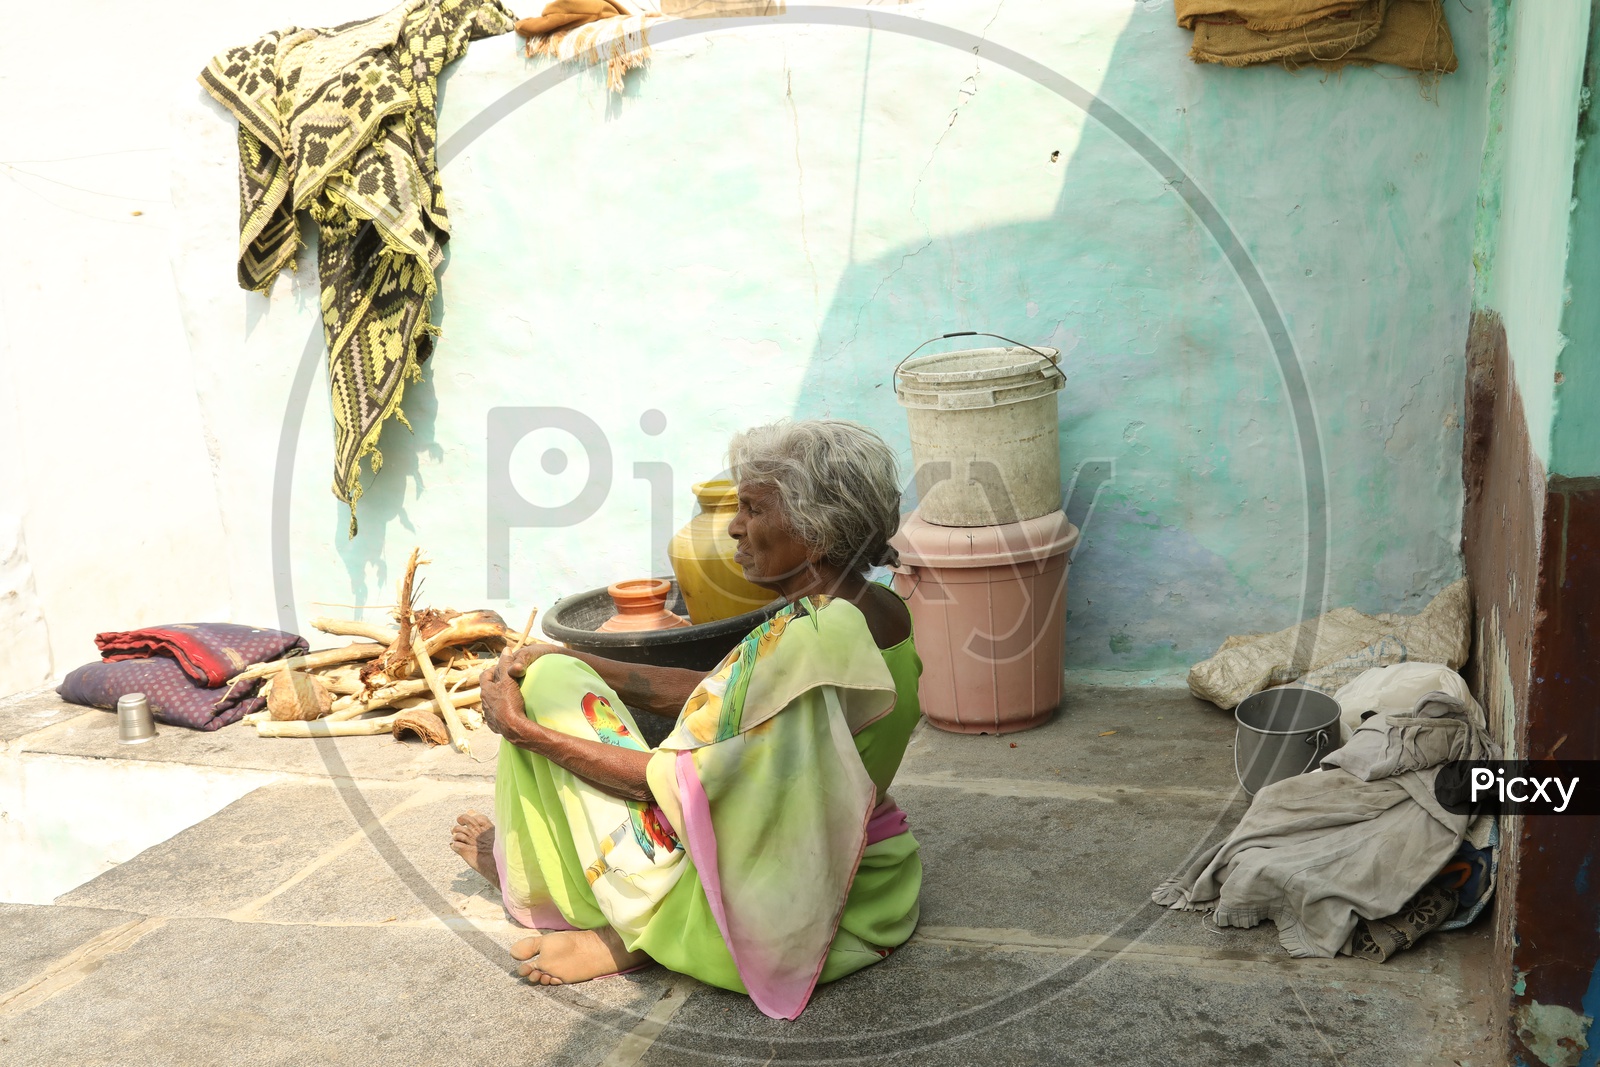 An old women sitting on the floor